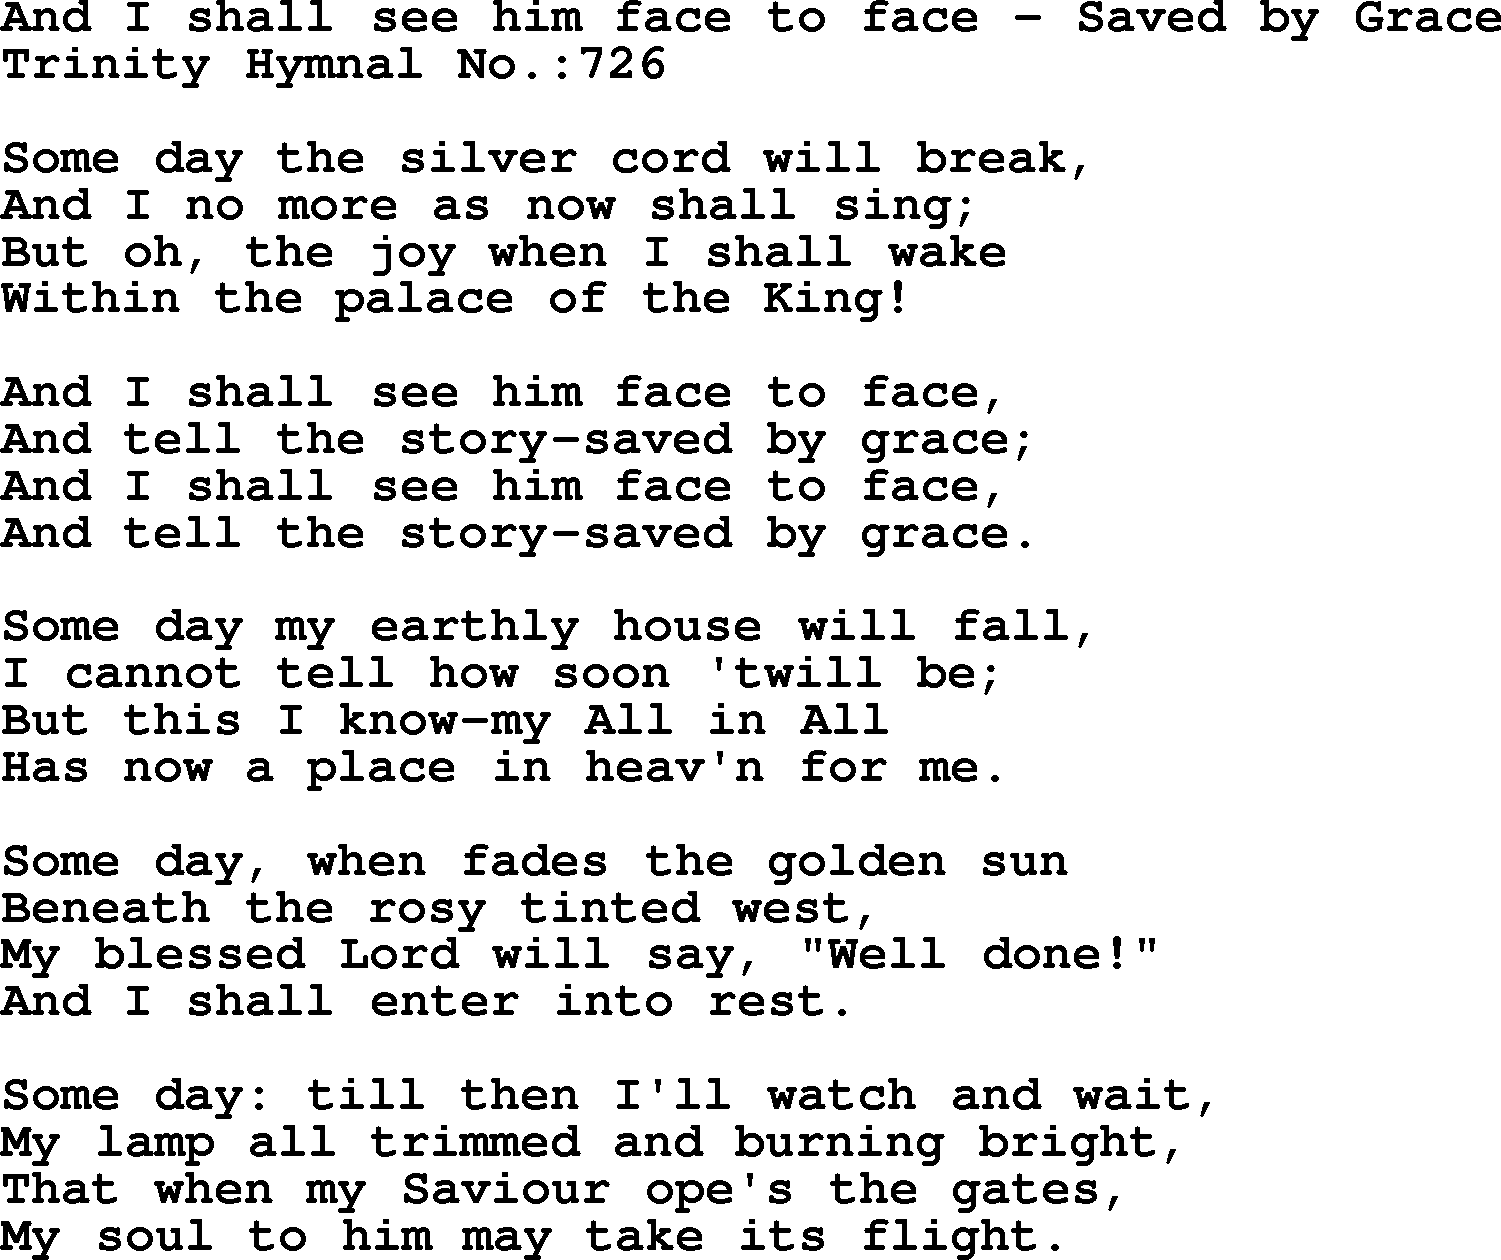 Trinity Hymnal Hymn: And I Shall See Him Face To Face--Saved By Grace, lyrics with midi music